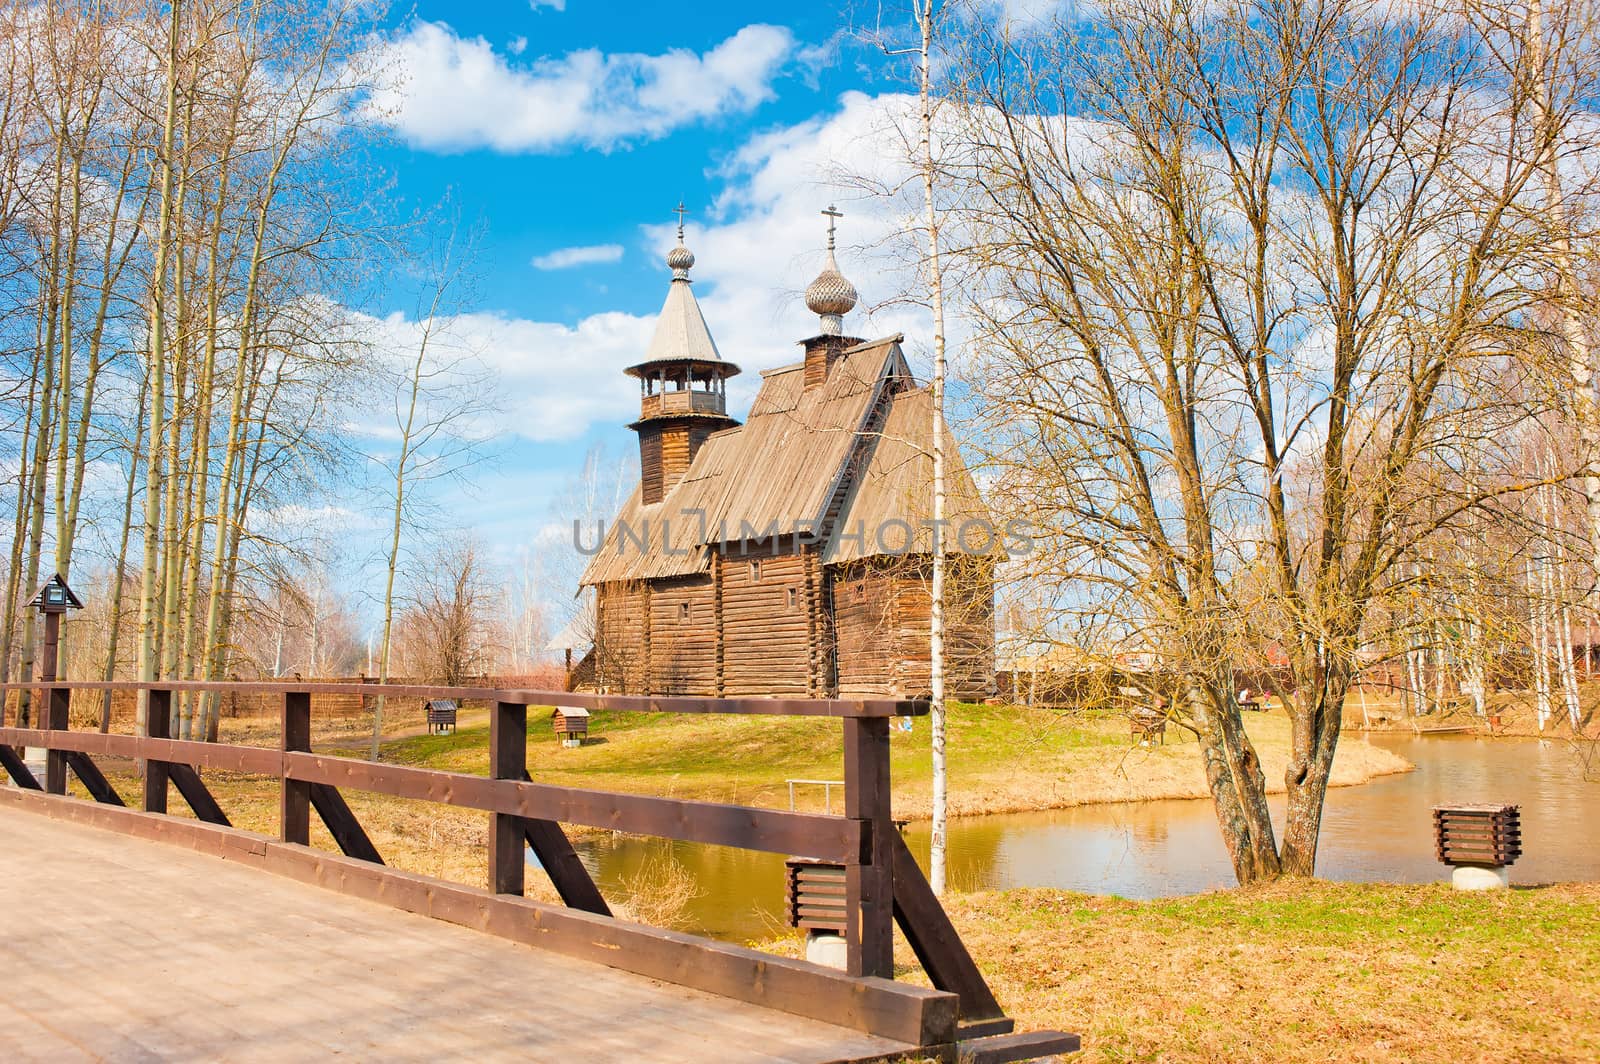 Wooden Russian Orthodox church in the countryside. by kosmsos111